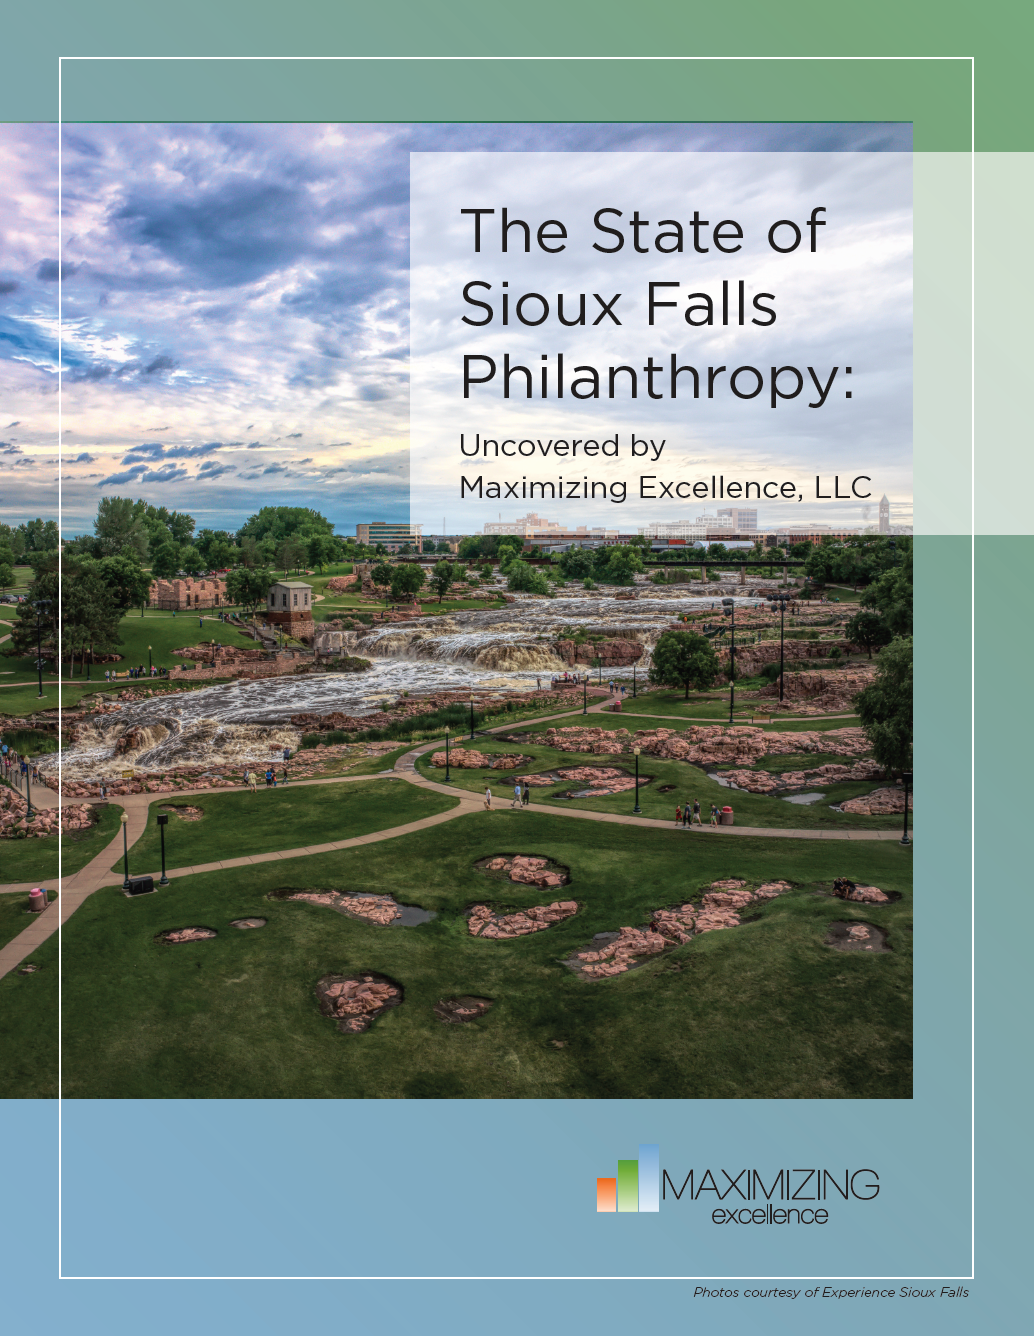 Cover Page of The State of Sioux Falls Philanthropy study.